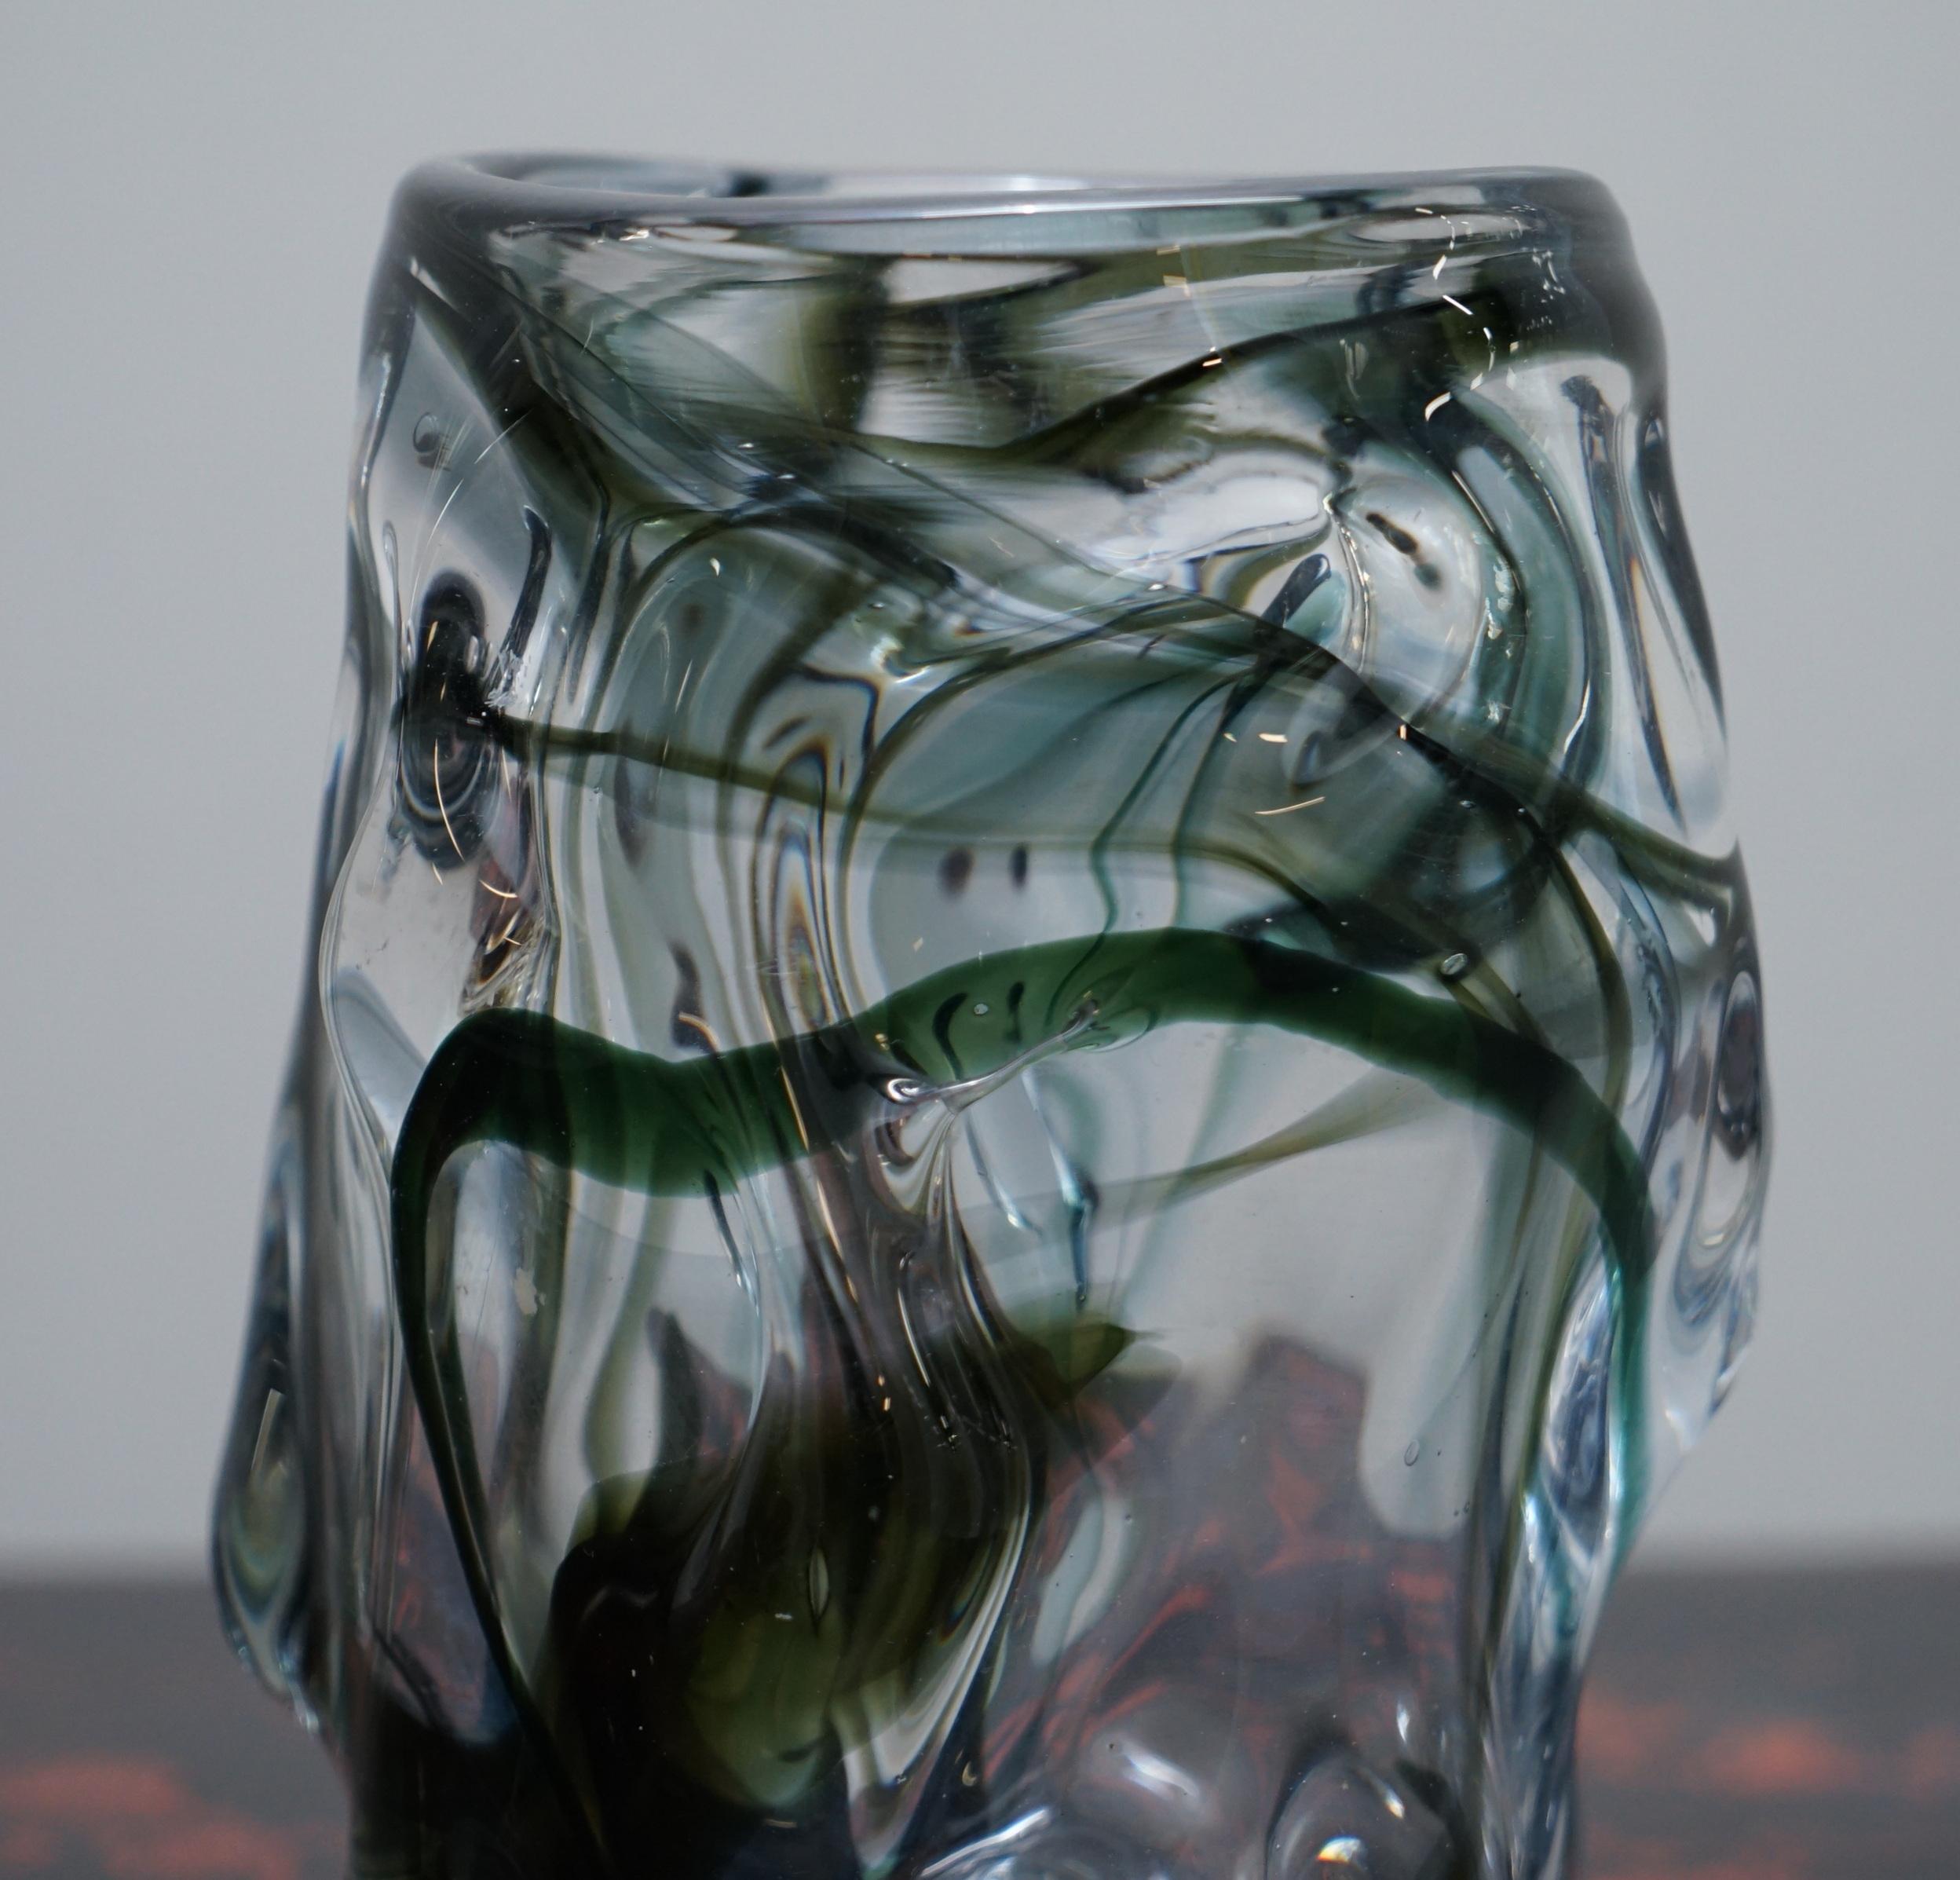 One of Three Stunning Whitefrairs Vases with Ornately Crafted Bodies, Medium 1